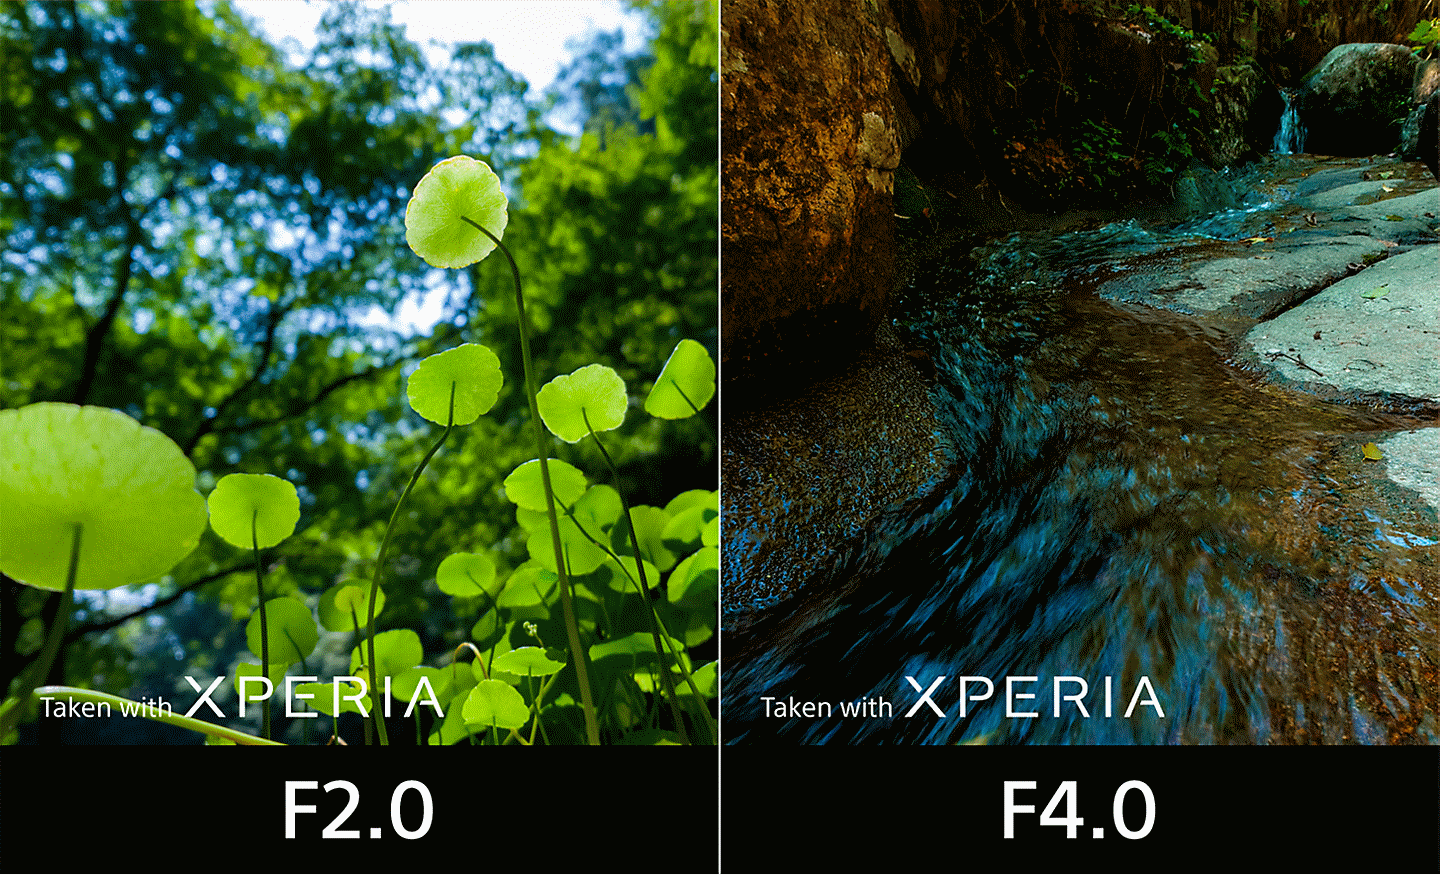 Split-screen comparing an image of foliage shot with F2.0 aperture and an image of a stream shot with F4.0. Text on images reads "Taken with XPERIA".